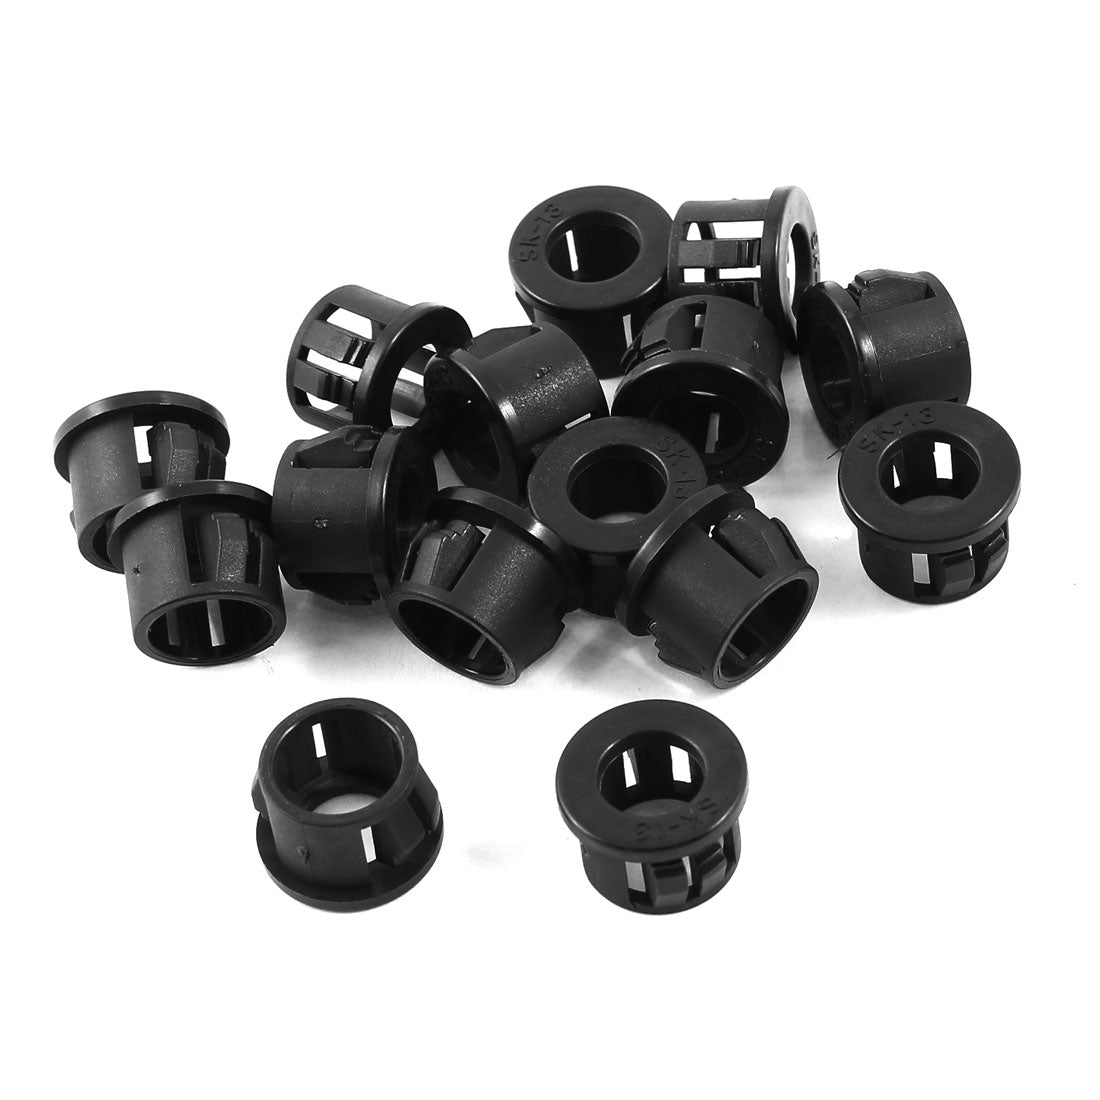 Uxcell Uxcell 15pcs Black Round Cable Hose Harness Protective Snap Bushing Plugs Grommet 13mm Panel Hole Dia